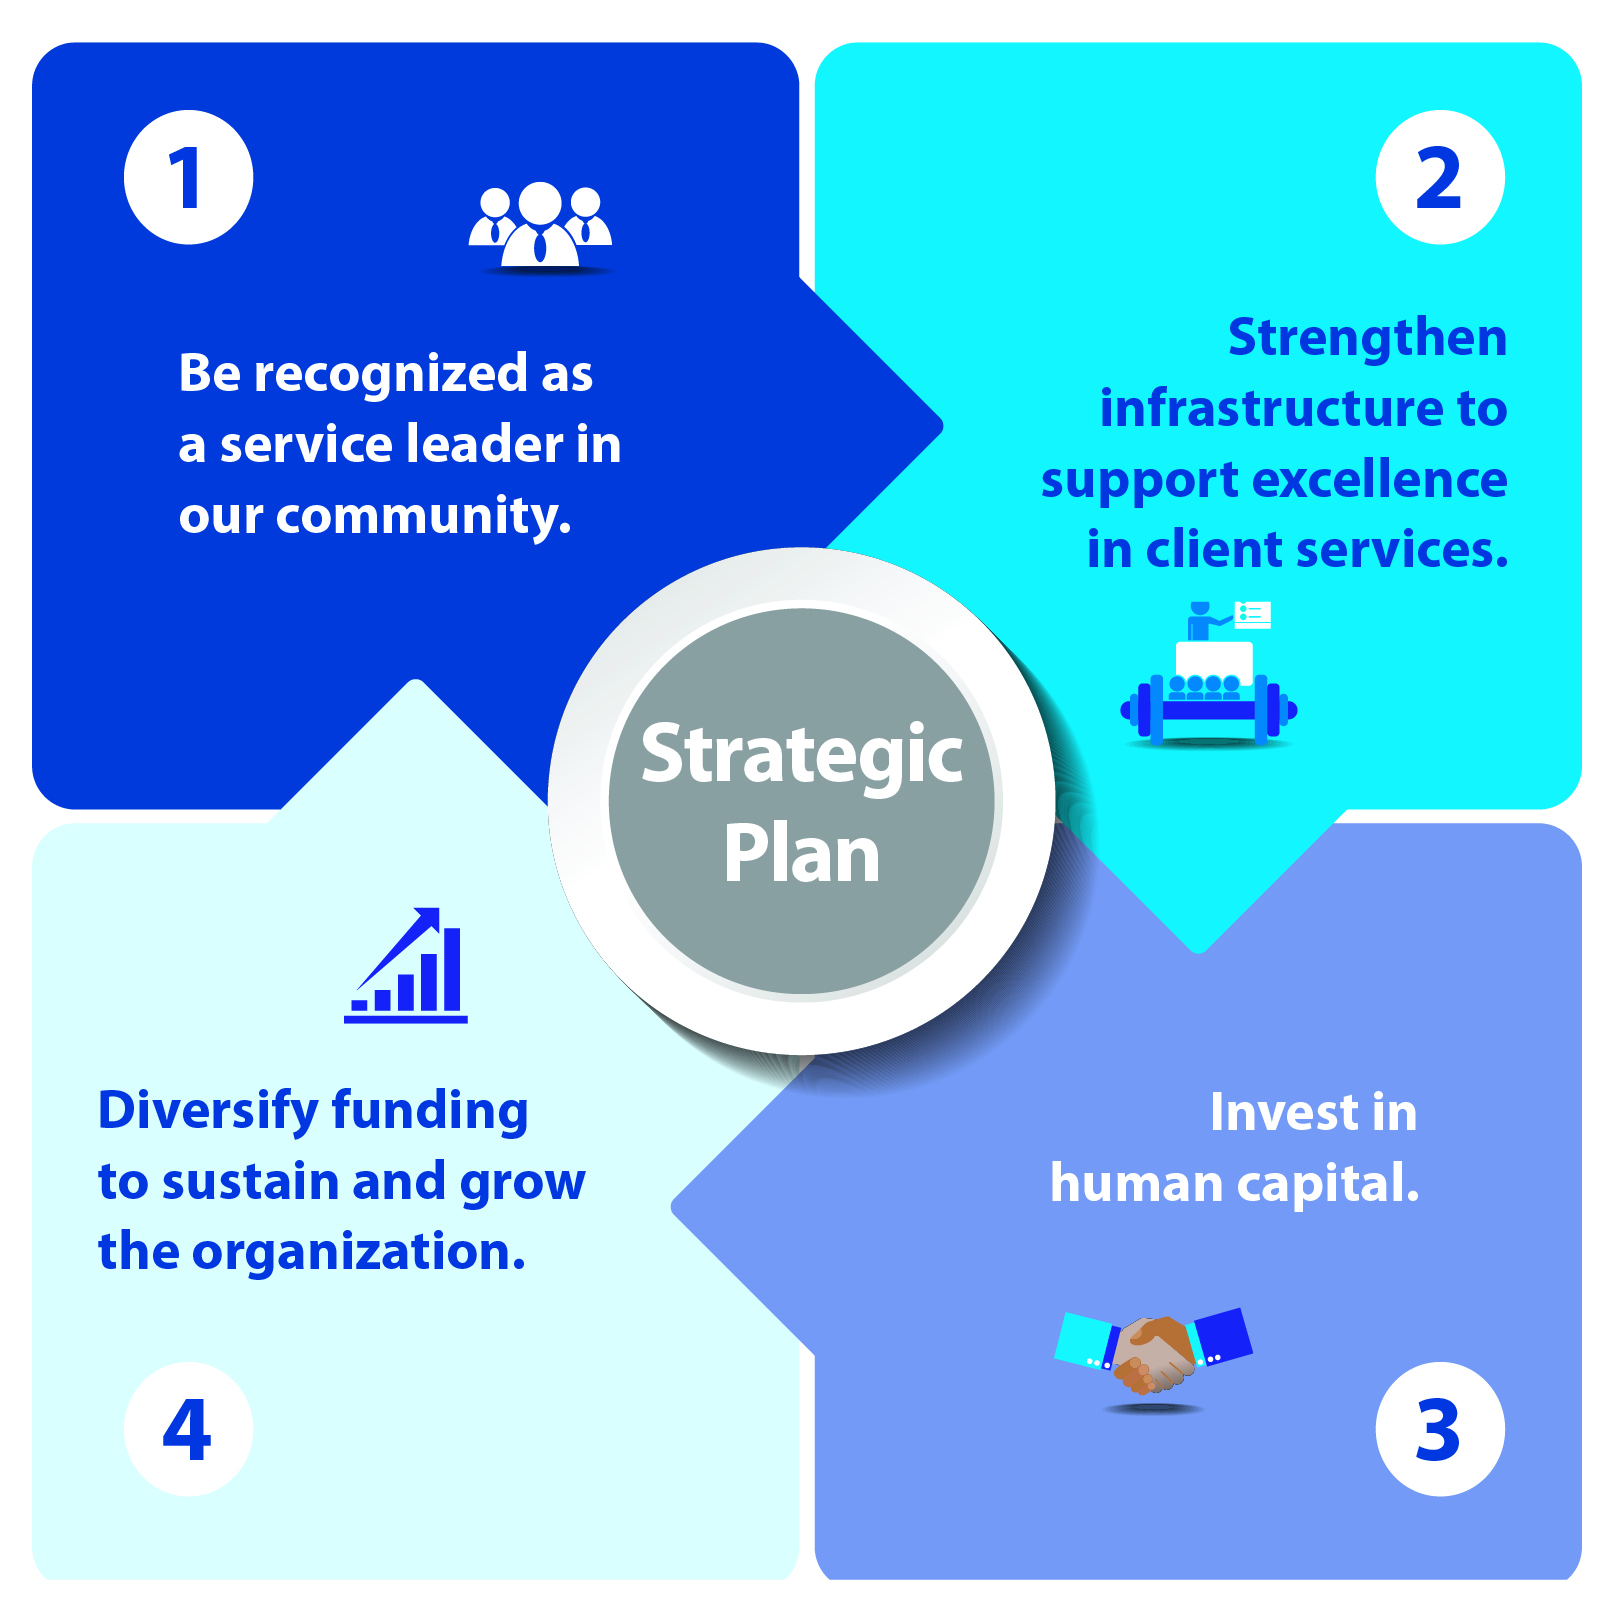 Image of the four key pillars: 1. Be recognized as a service leader in our community 2. Strengthen infrastructure to support excellance in client services 3. Diversify funding to sustain and grown the organization and 4. invest in human capital